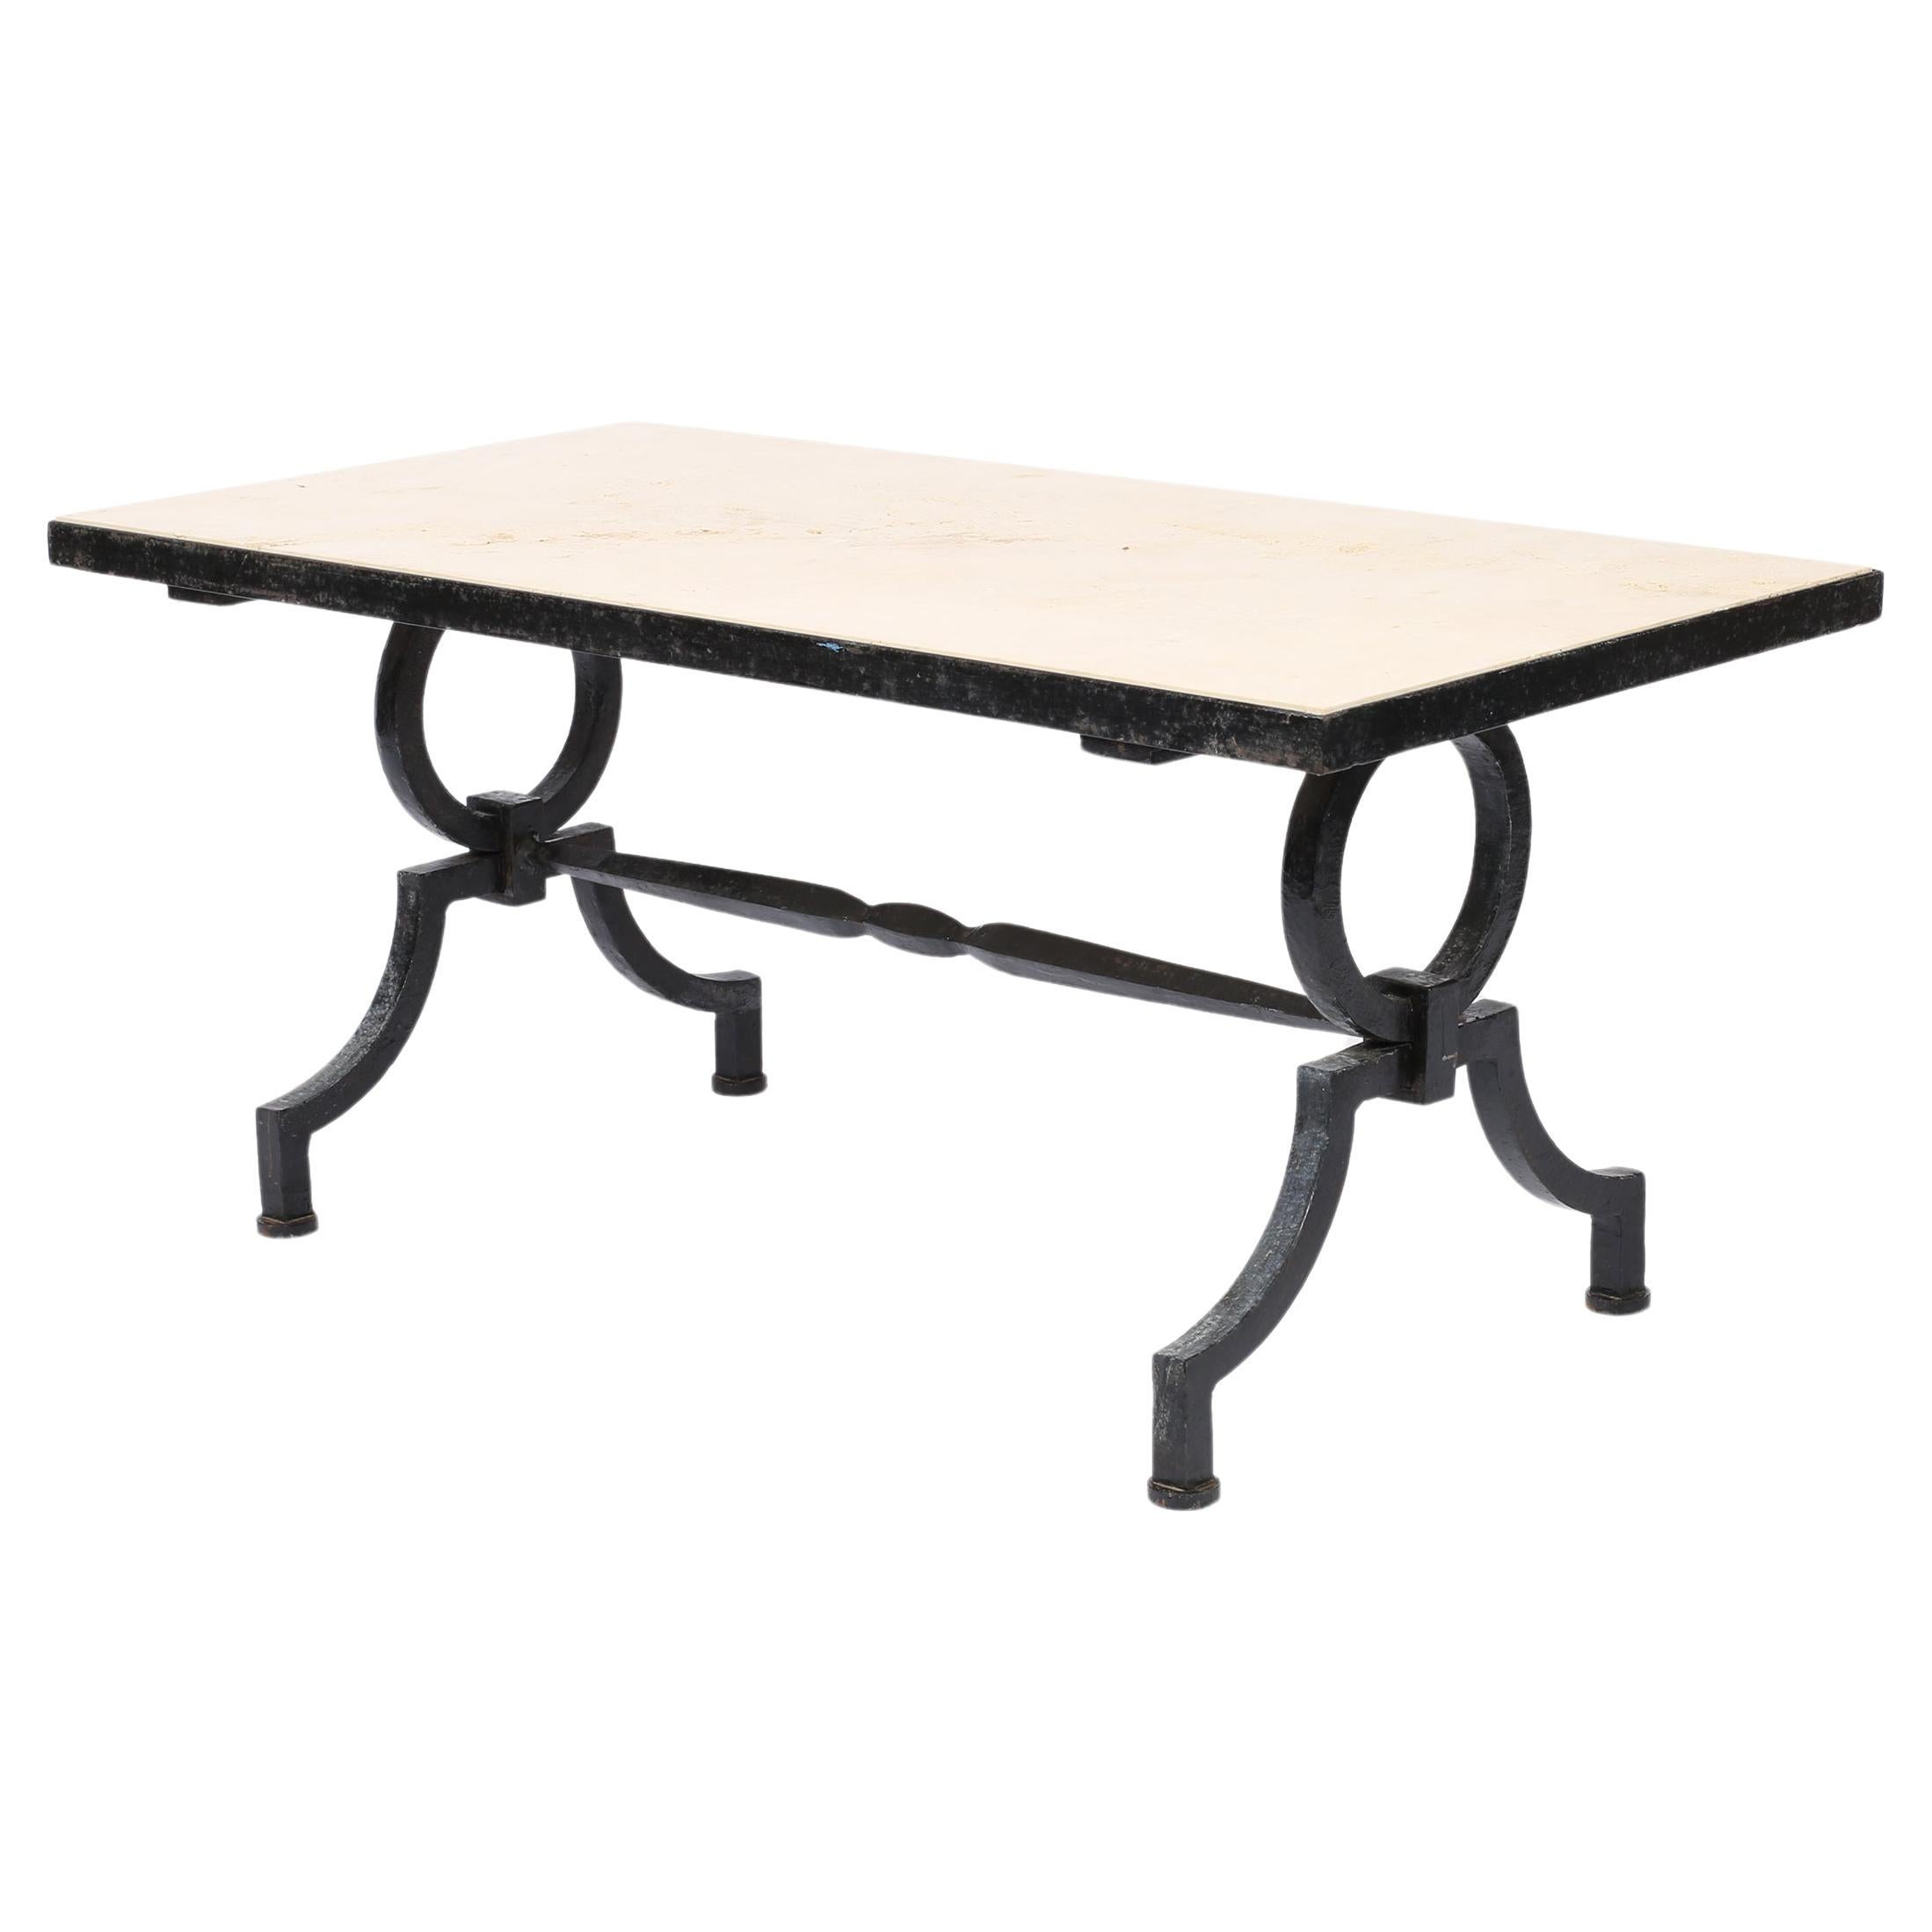 French Forged Iron and Limestone Coffee Table by Gilbert Poillerat, c. 1940.